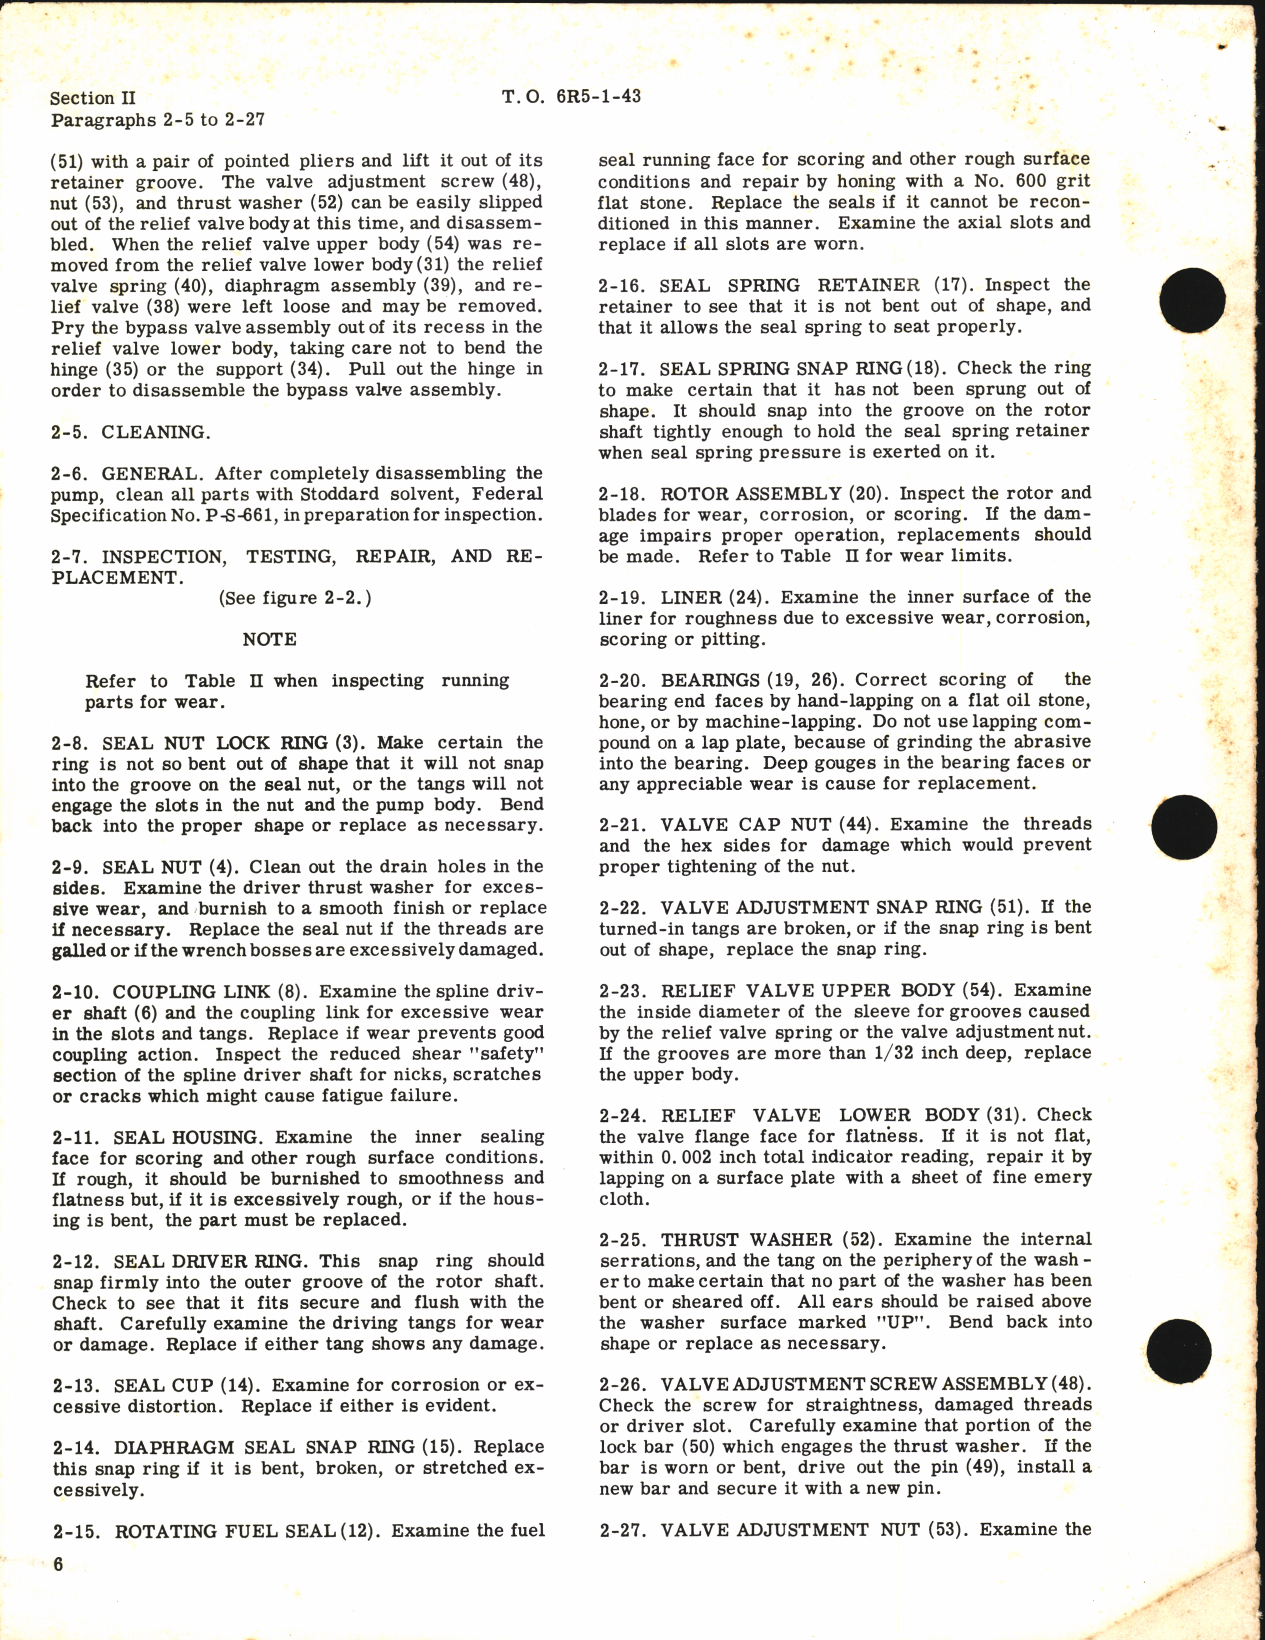 Sample page 8 from AirCorps Library document: Overhaul Instructions for Engine-Driven and Electric Motor-Driven Fuel Pump